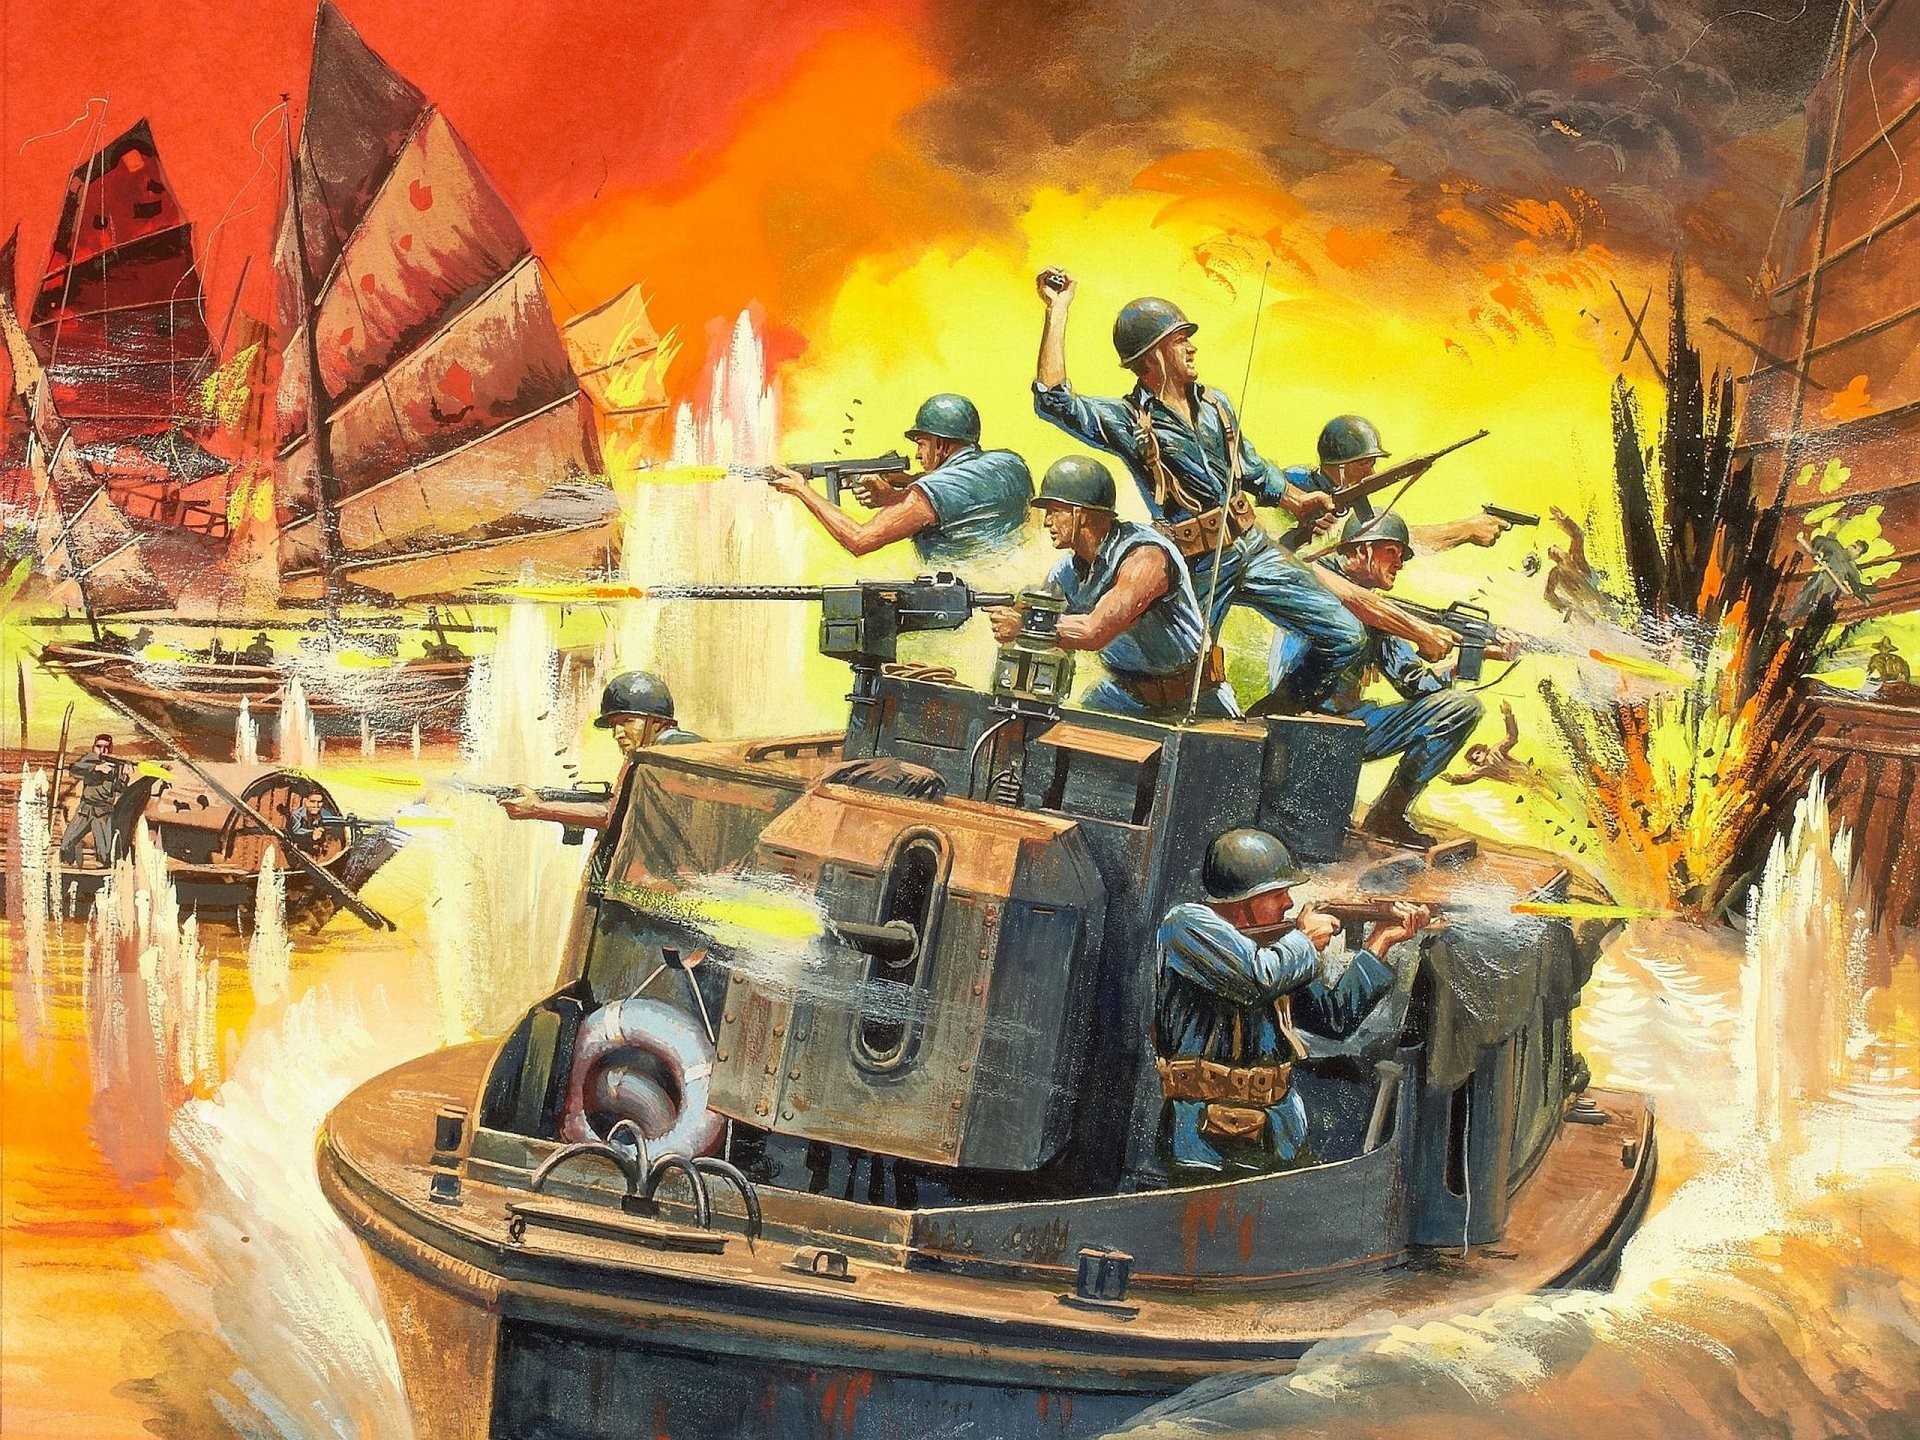 1920x1440 art vietnam mekong river armored boat men weapon shooting explosions fire  junks picture